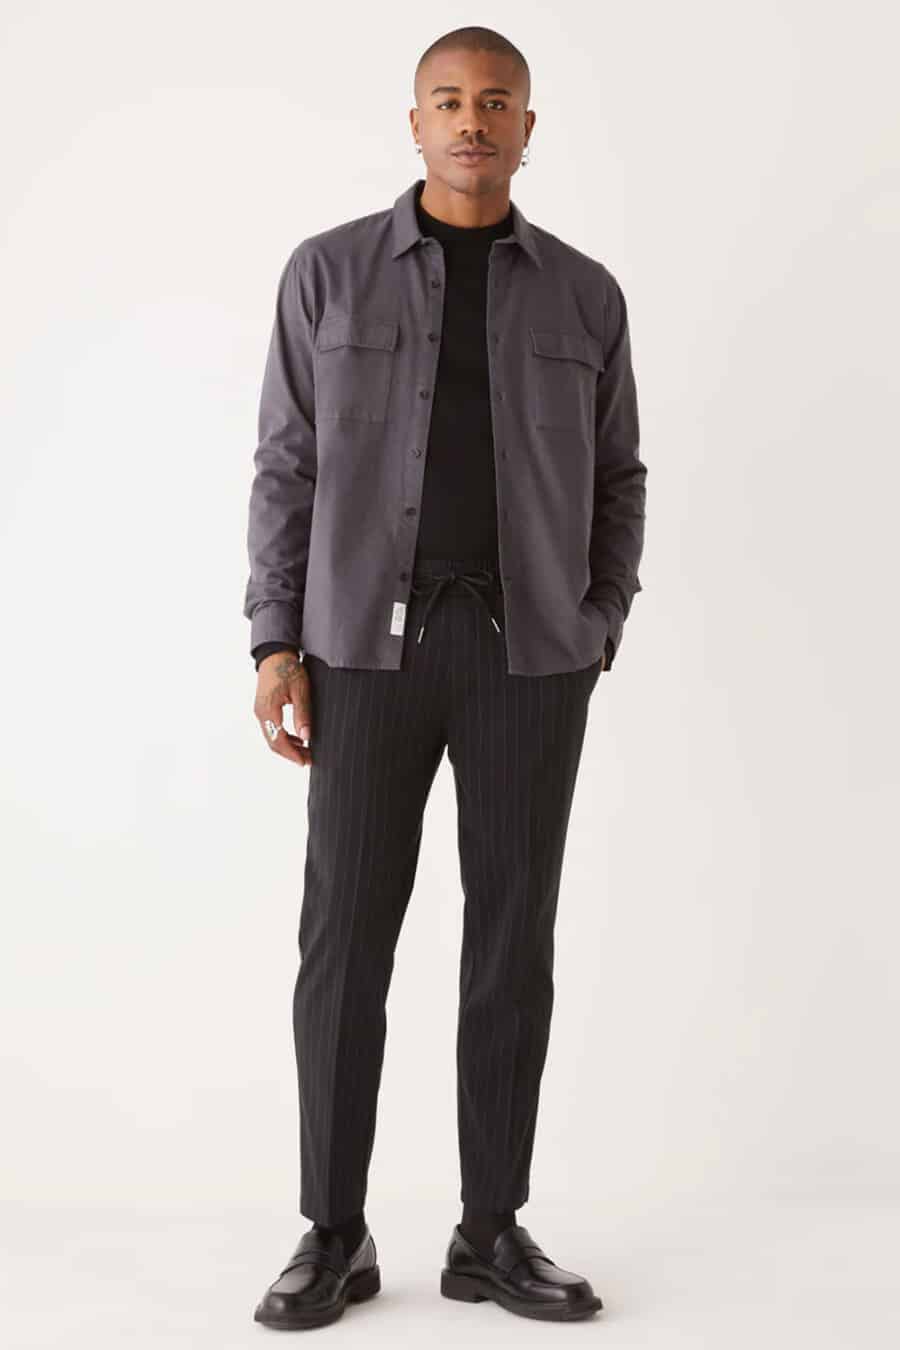 Men's black pinstripe drawstring trousers, black tucked in T-shirt, grey overshirt and black leather penny loafers outfit